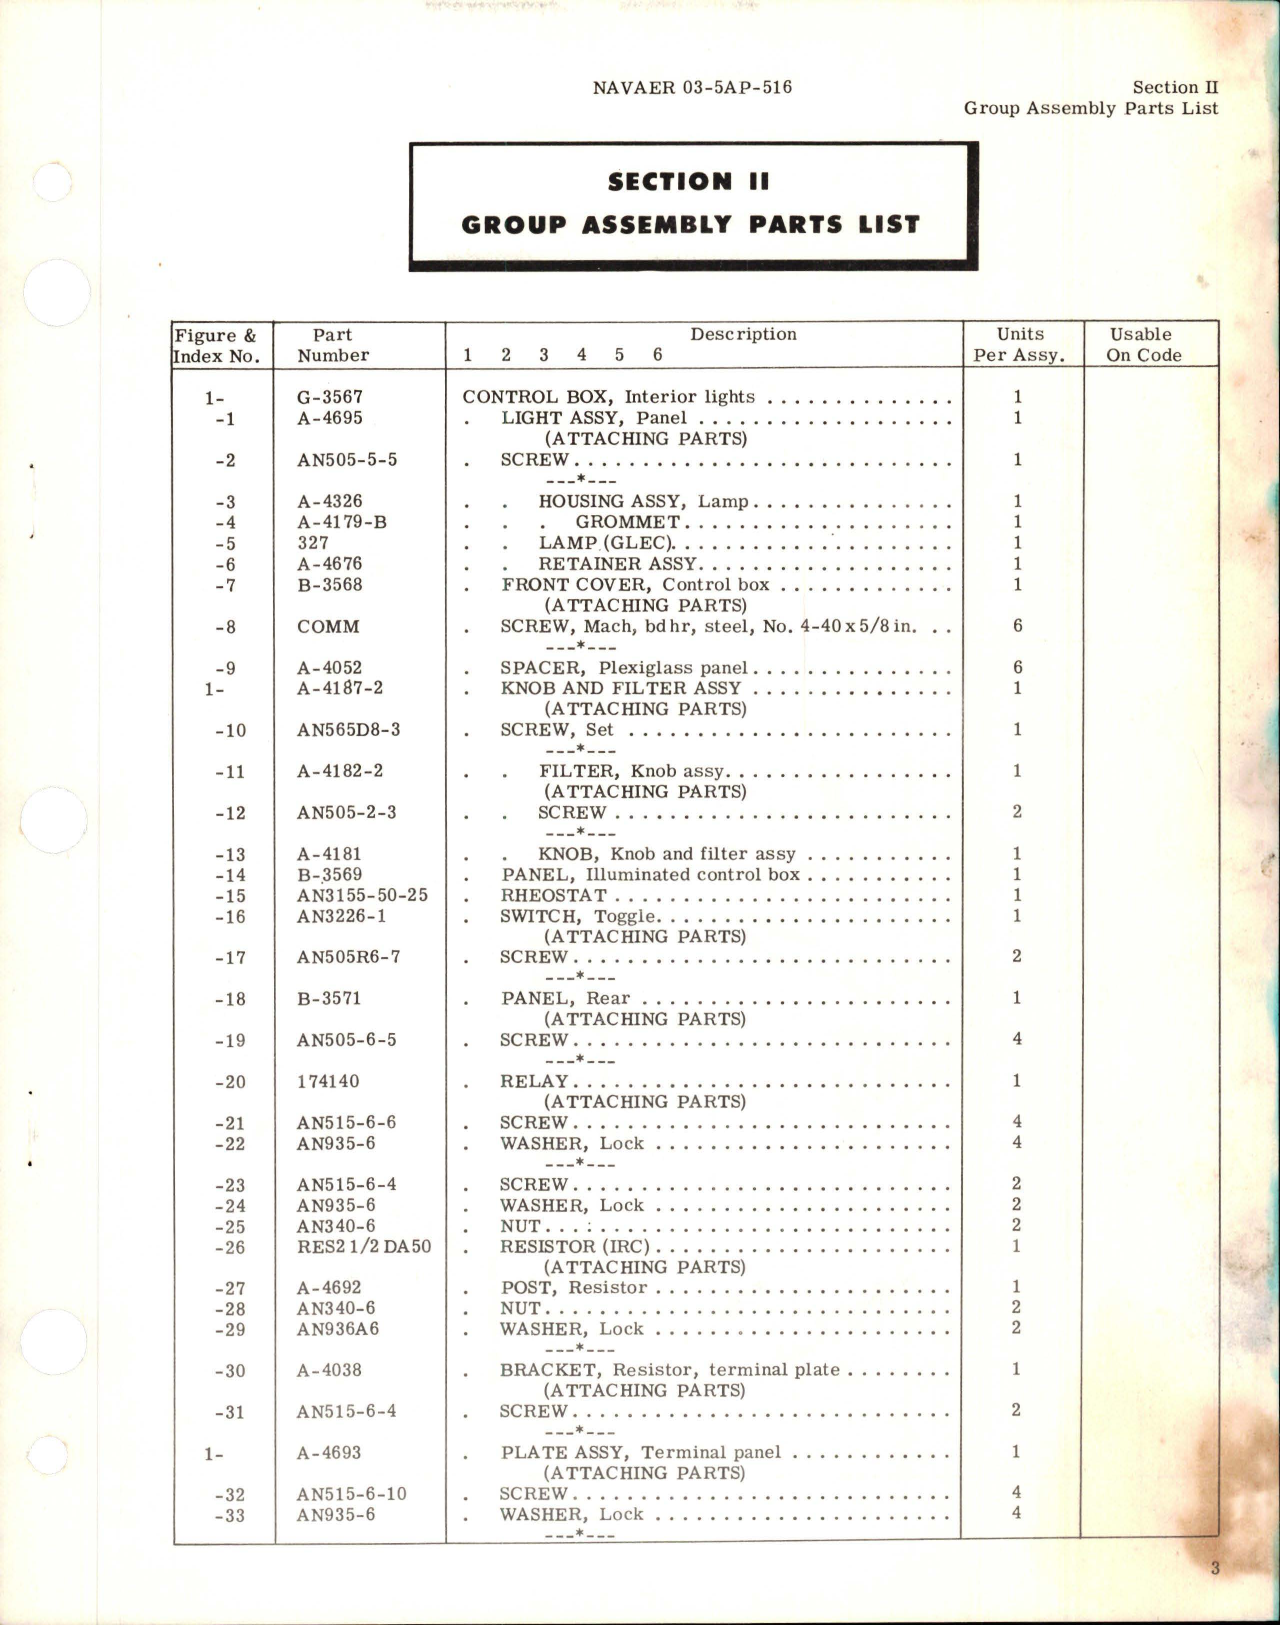 Sample page 5 from AirCorps Library document: Illustrated Parts Breakdown for Interior Lights Control Box - Part G-3567